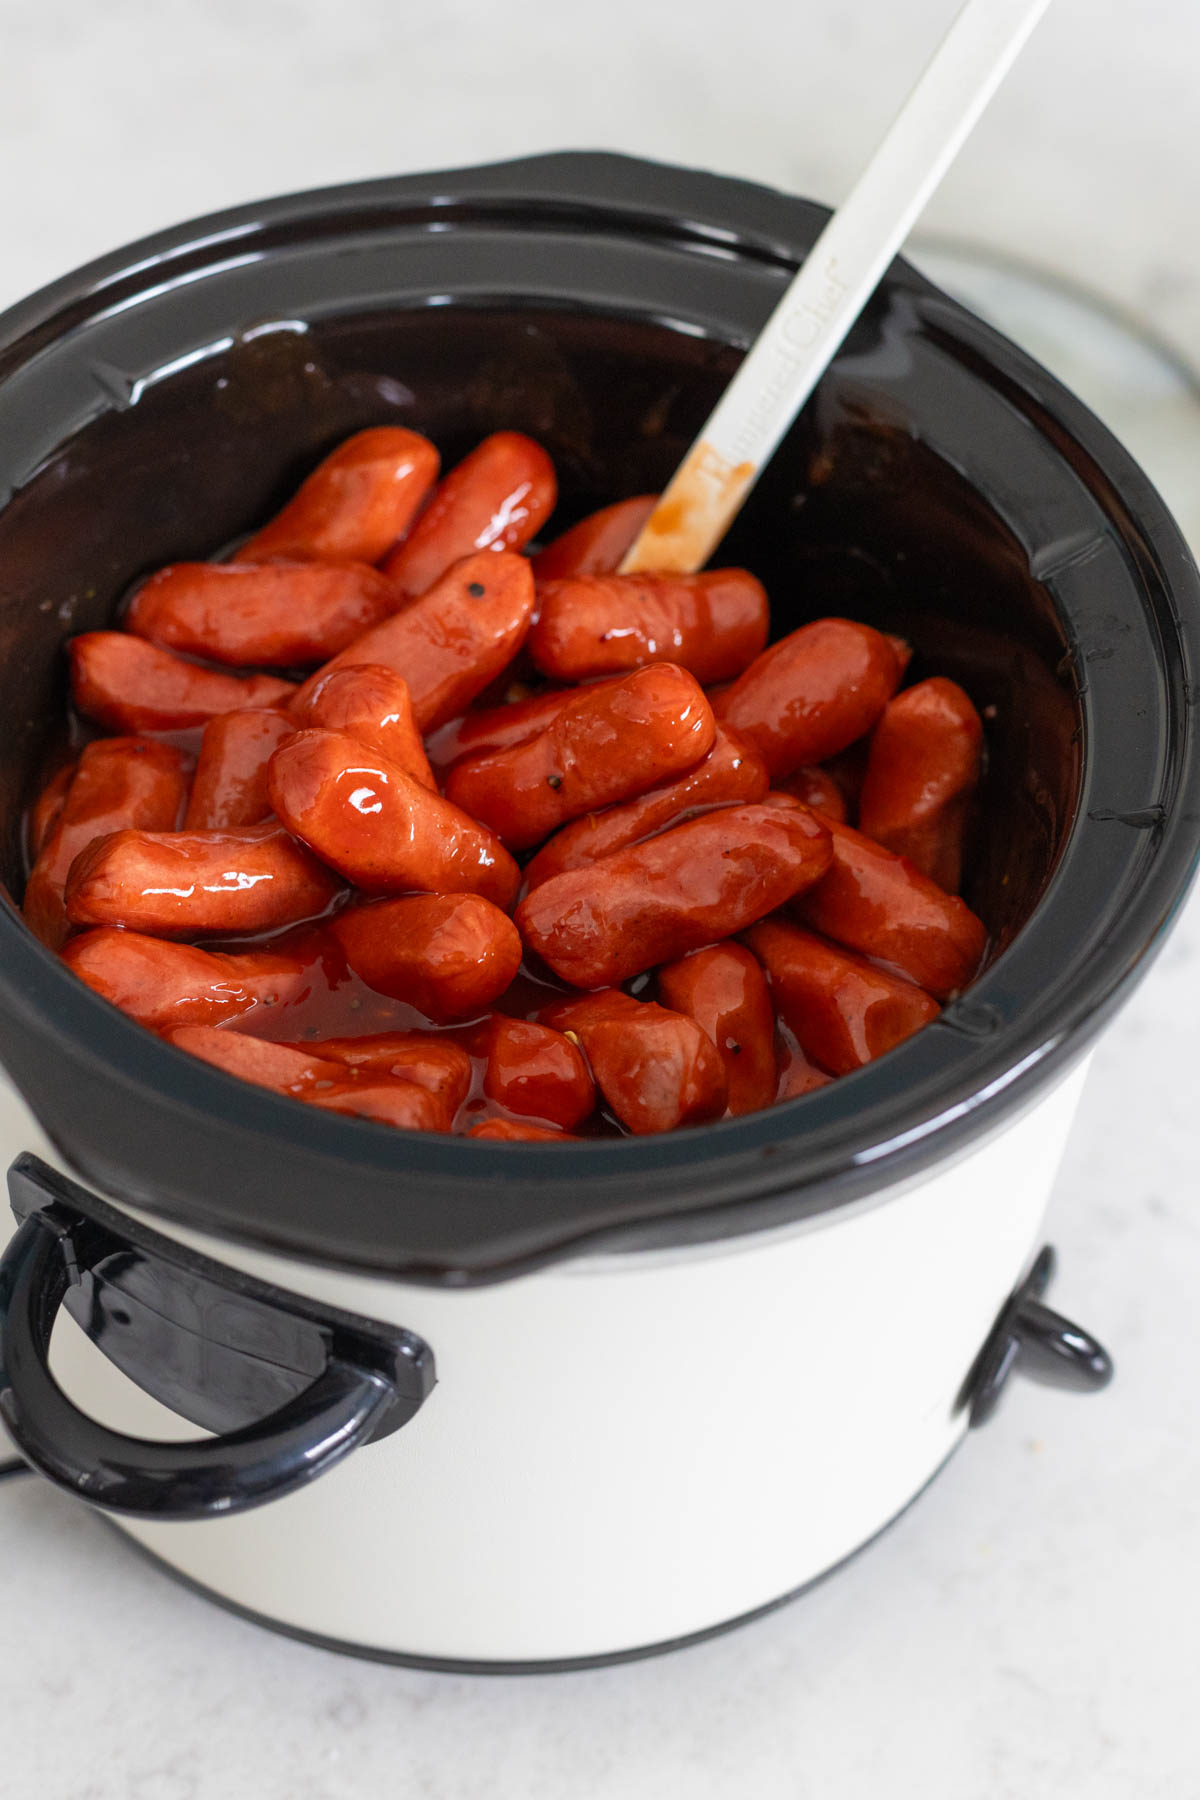 The ingredients have been stirred together and the sausages are about to be cooked in the slowcooker.